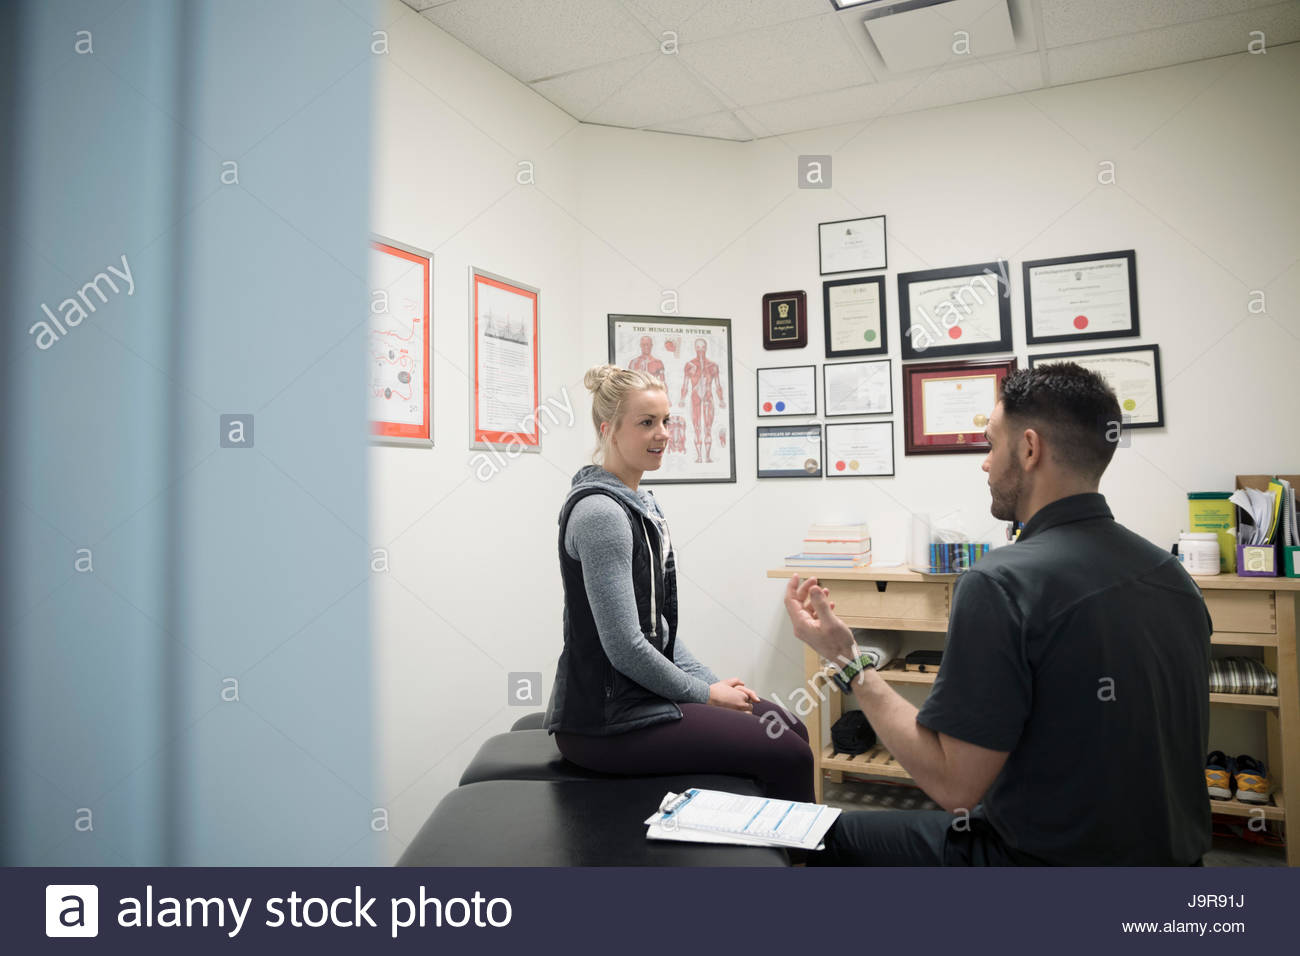 Male physiotherapist talking to female client in office Stock Photo